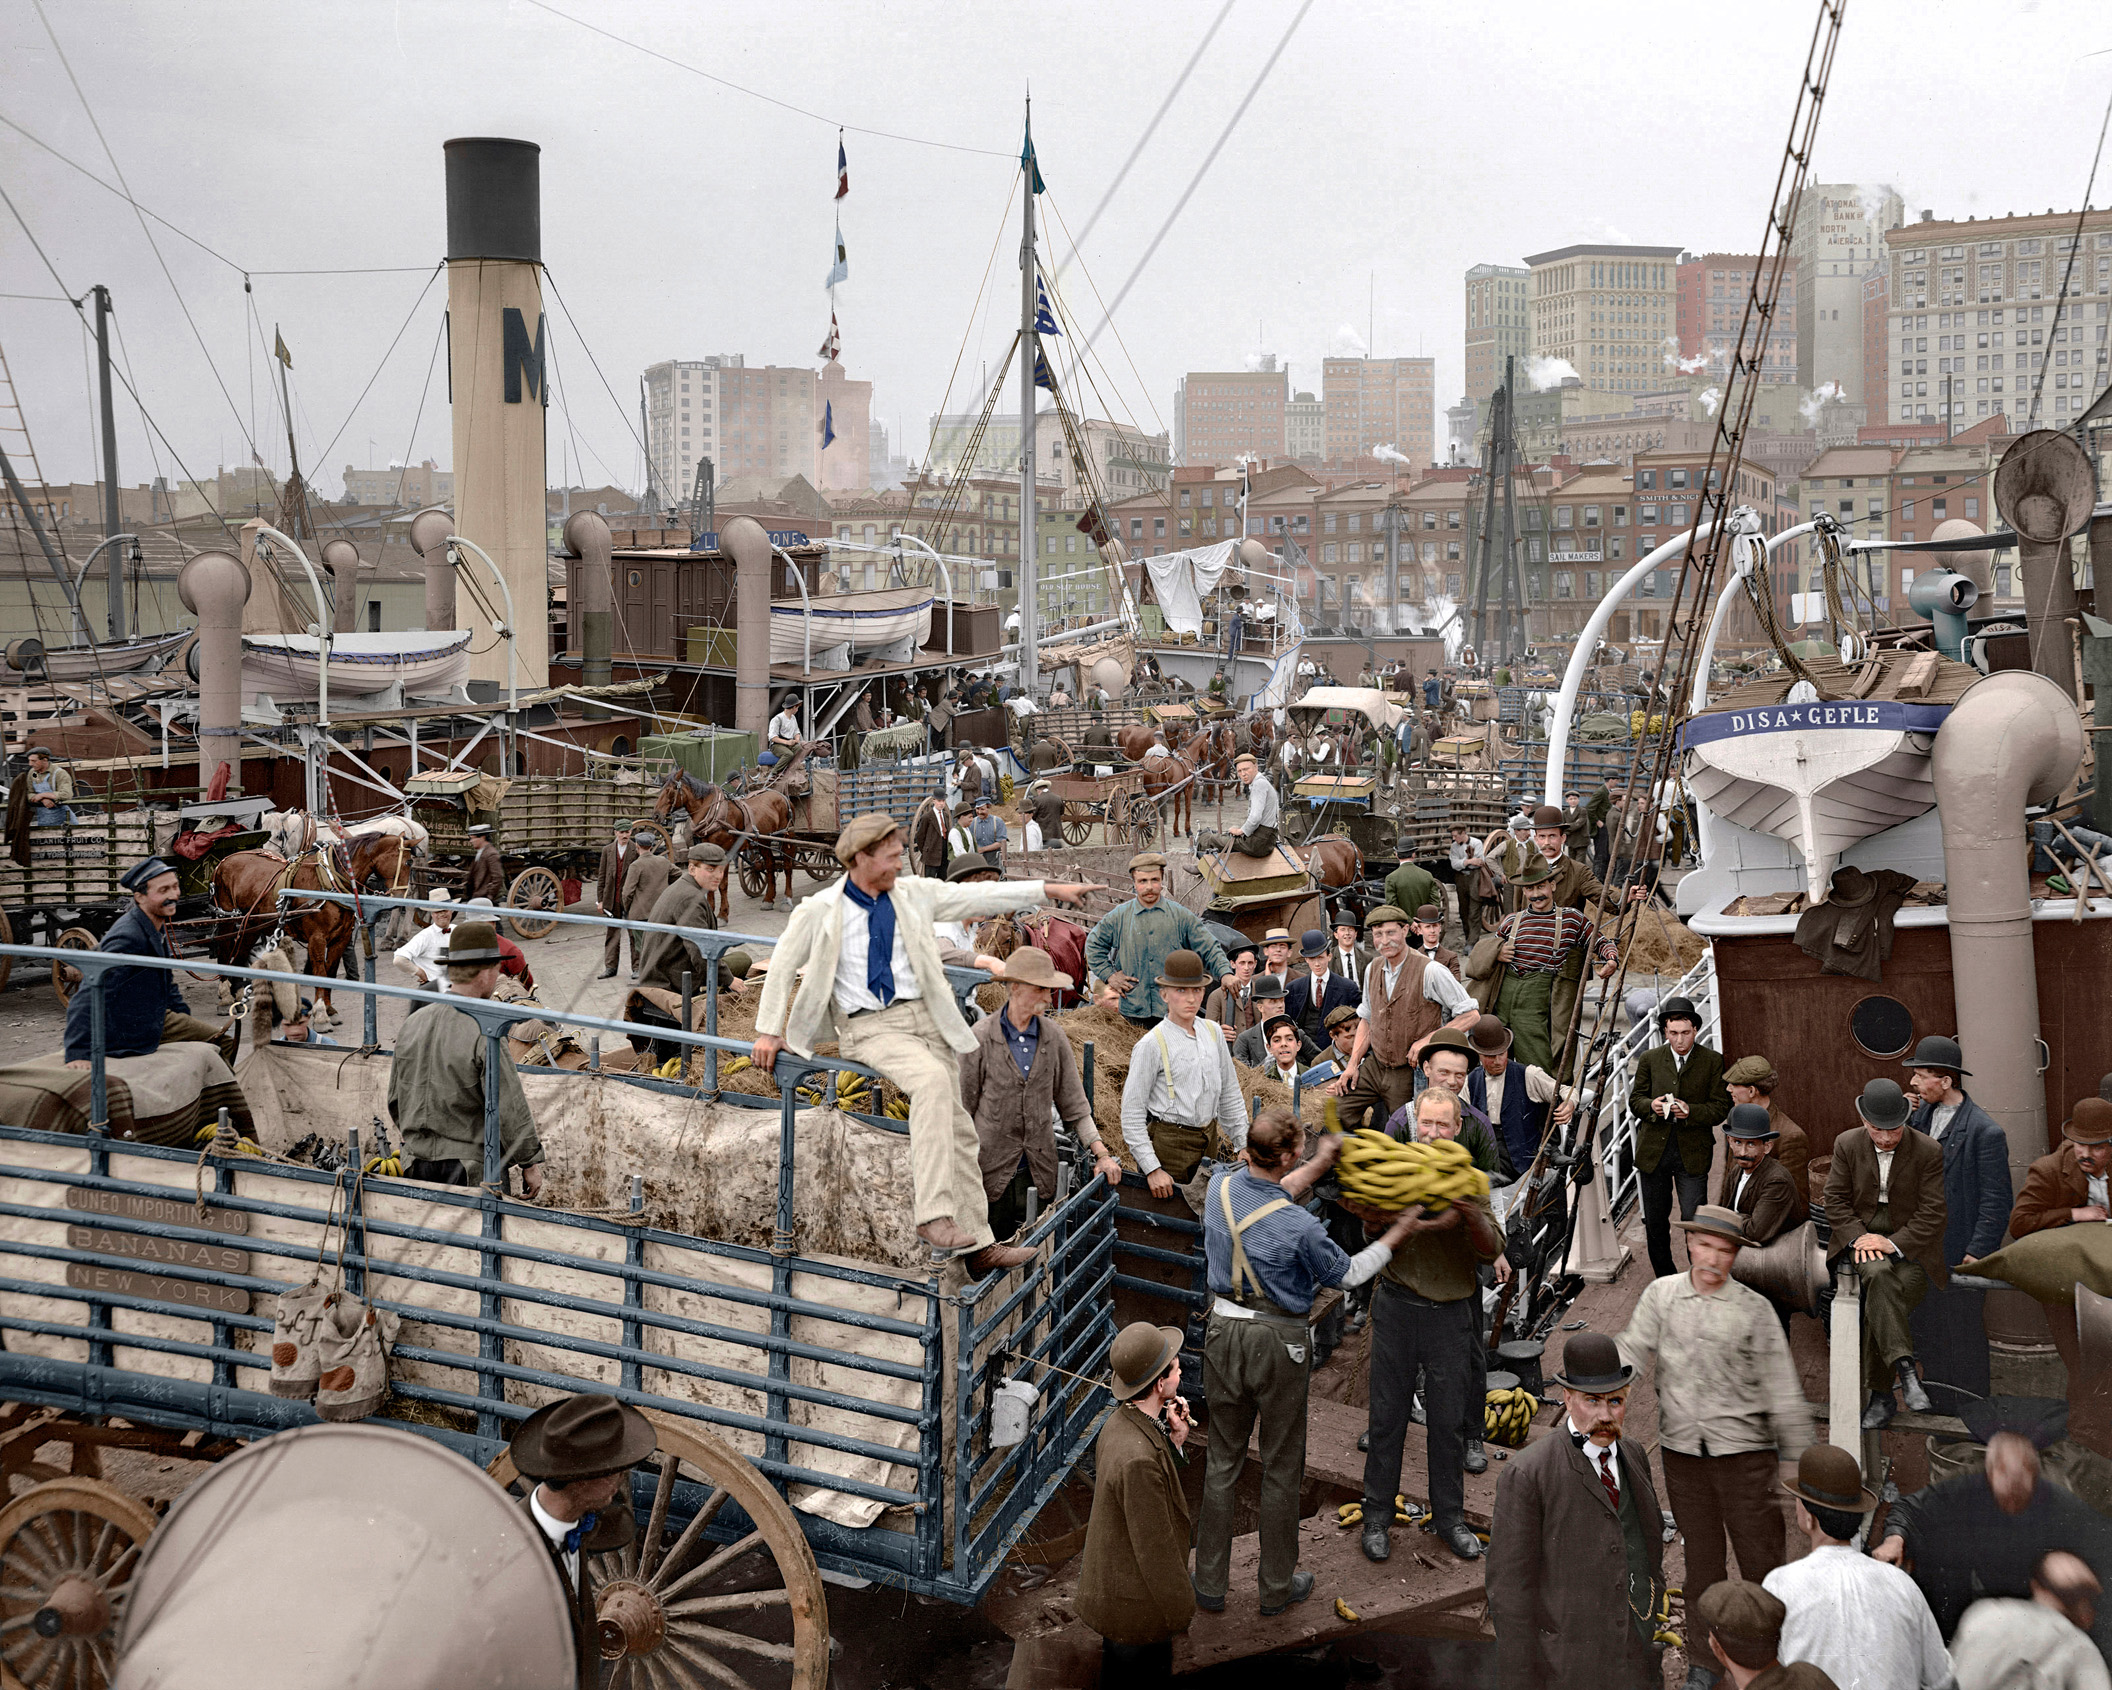 Colorized from this Shorpy original.This took a long time to colorize! My biggest project yet. View full size.